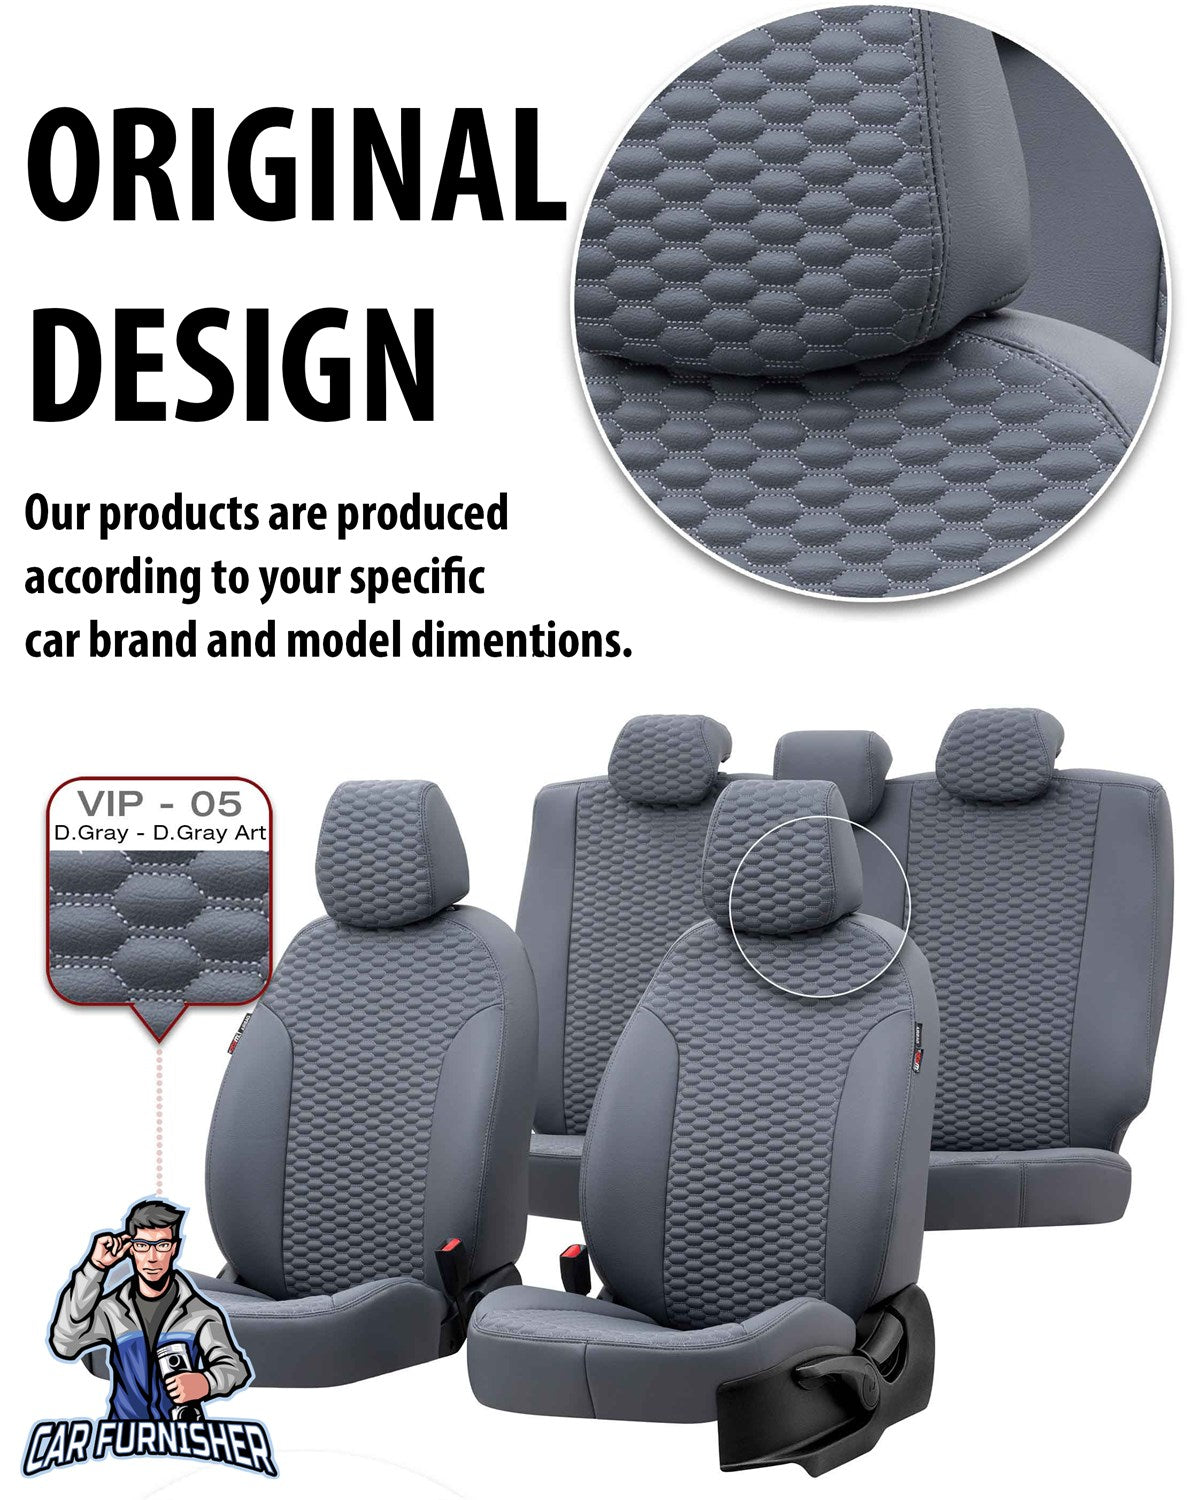 Daihatsu Materia Seat Covers Tokyo Leather Design Ivory Leather